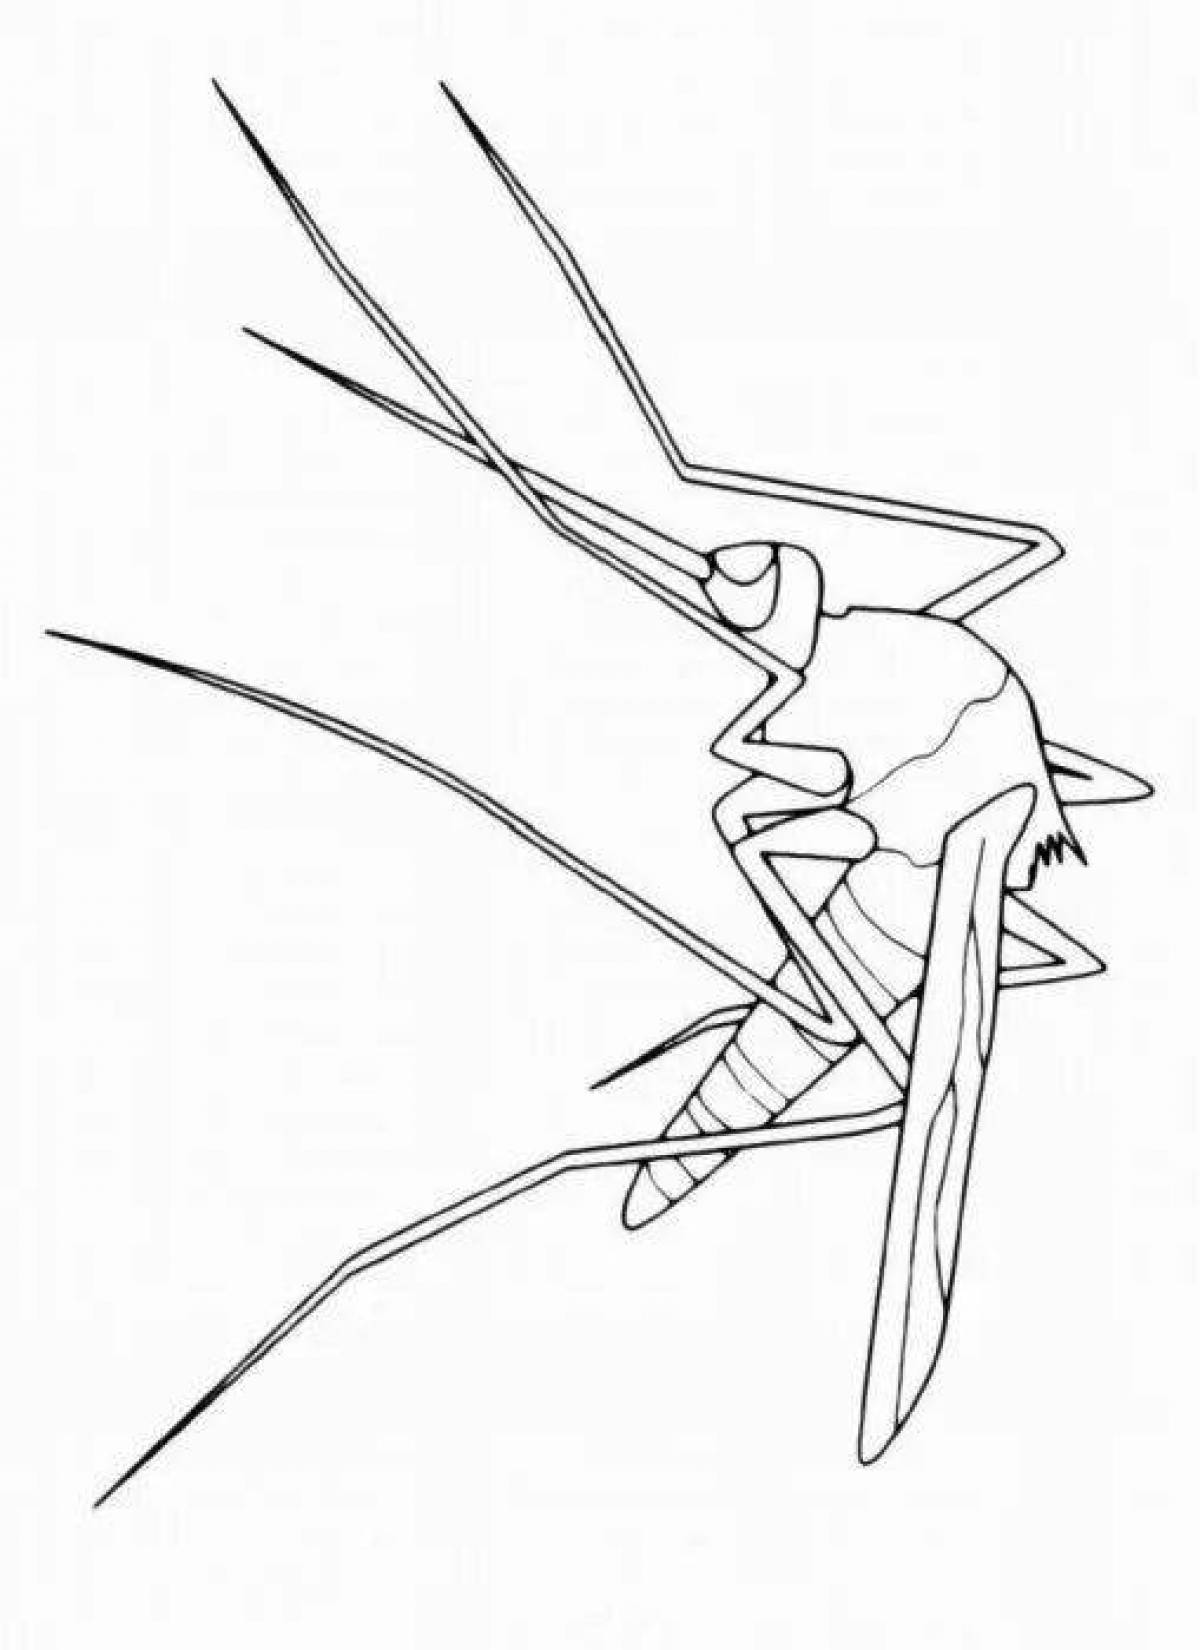 Incredible mosquito coloring book for kids